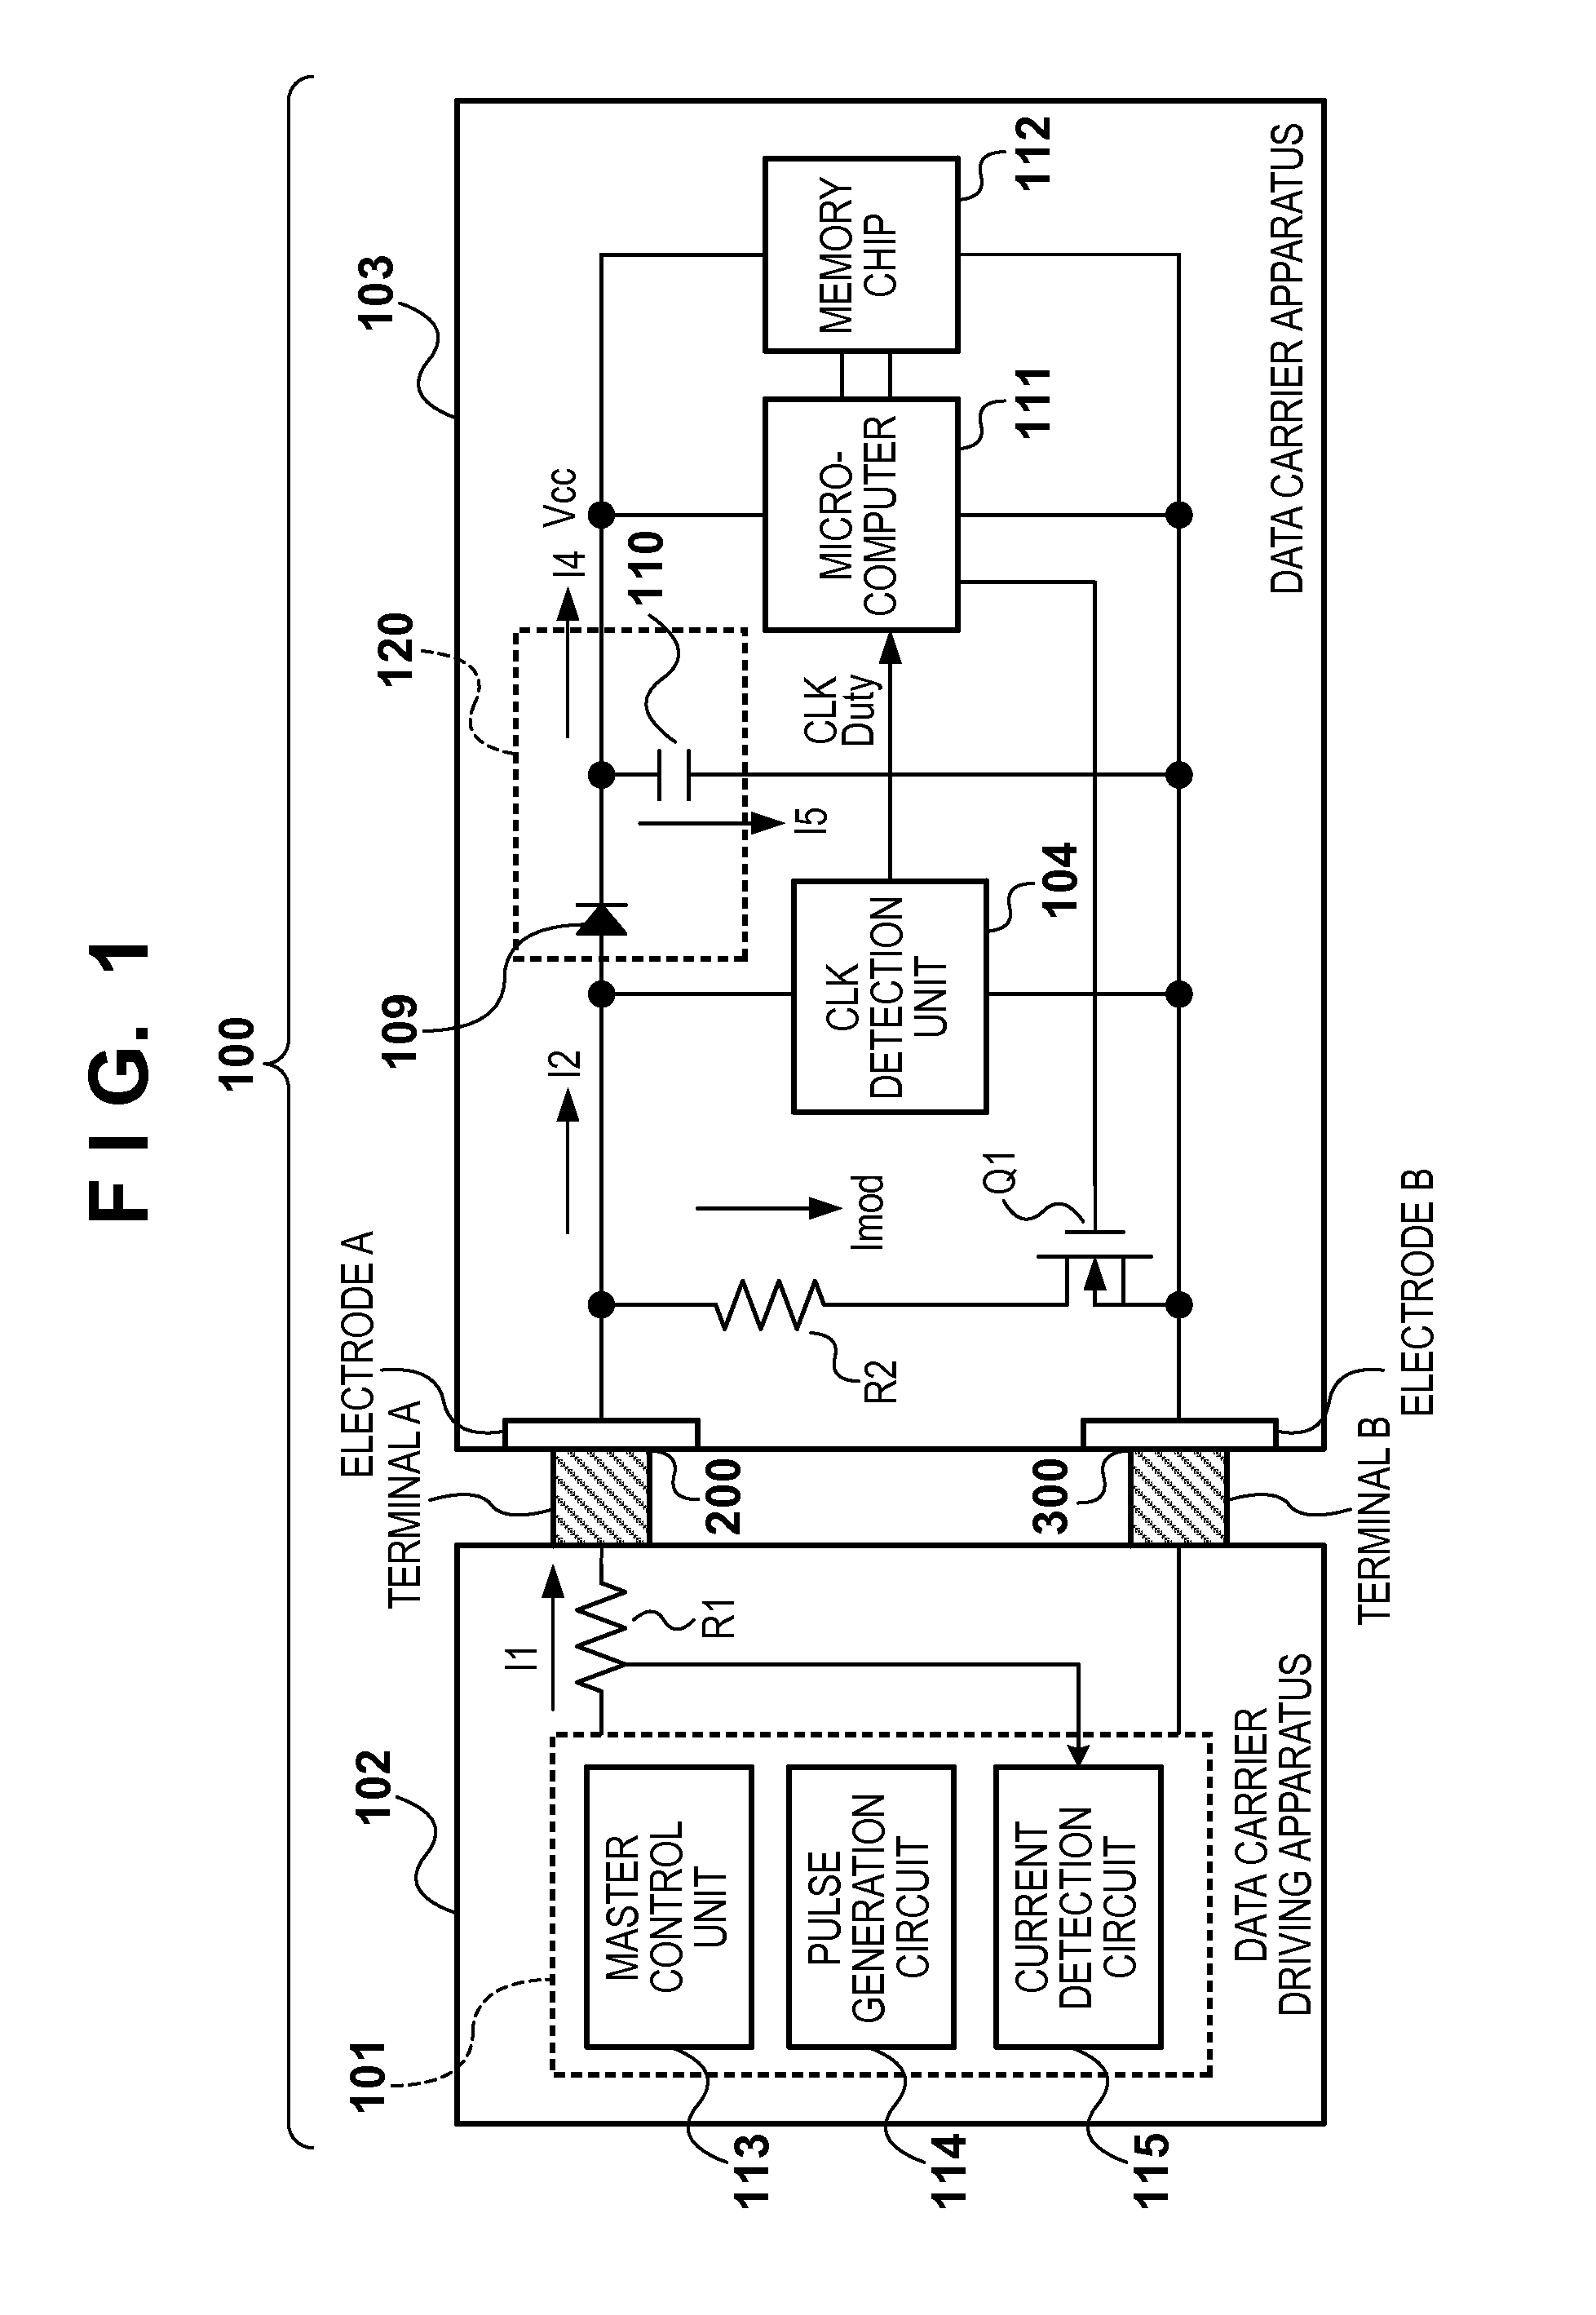 Data communication system, data carrier driving apparatus, and data carrier apparatus